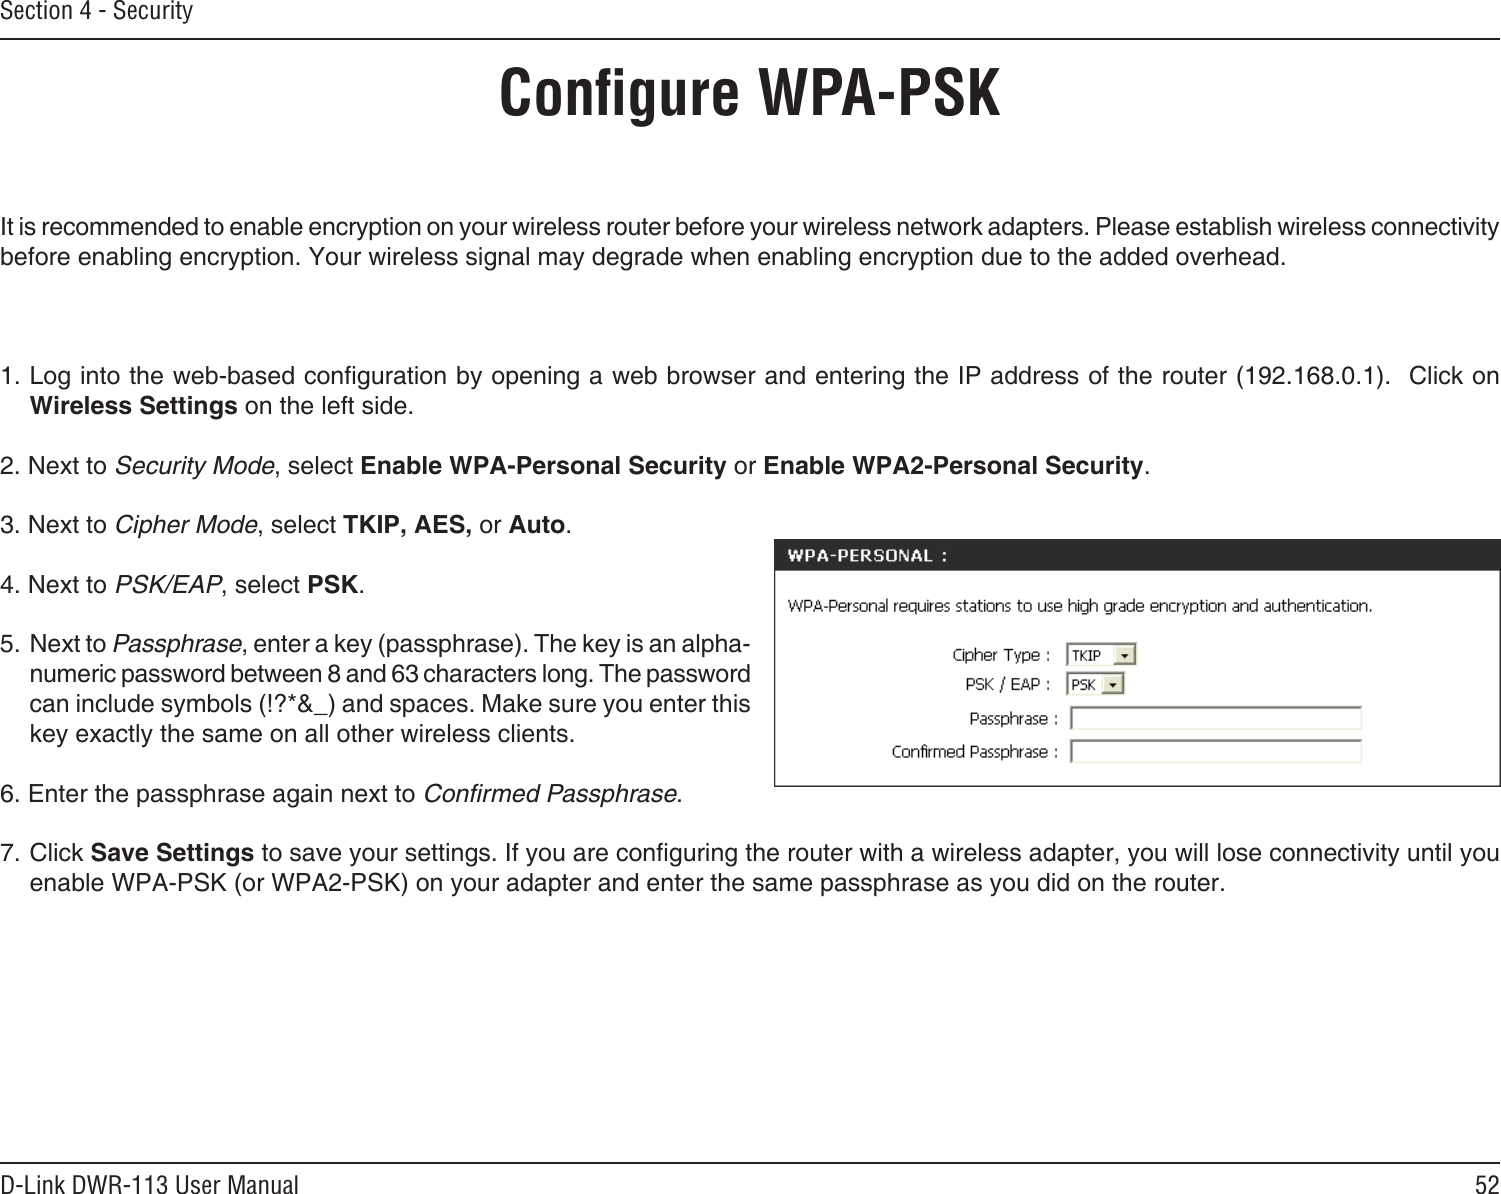 52D-Link DWR-113 User ManualSection 4 - SecurityConﬁgure WPA-PSKIt is recommended to enable encryption on your wireless router before your wireless network adapters. Please establish wireless connectivity before enabling encryption. Your wireless signal may degrade when enabling encryption due to the added overhead.1. Log into the web-based conguration by opening a web browser and entering the IP address of the router (192.168.0.1).  Click on Wireless Settings on the left side.2. Next to Security Mode, select Enable WPA-Personal Security or Enable WPA2-Personal Security.3. Next to Cipher Mode, select TKIP, AES, or Auto.4. Next to PSK/EAP, select PSK.5. Next to Passphrase, enter a key (passphrase). The key is an alpha-numeric password between 8 and 63 characters long. The password can include symbols (!?*&amp;_) and spaces. Make sure you enter this key exactly the same on all other wireless clients.6. Enter the passphrase again next to Conﬁrmed Passphrase.7. Click Save Settings to save your settings. If you are conguring the router with a wireless adapter, you will lose connectivity until you enable WPA-PSK (or WPA2-PSK) on your adapter and enter the same passphrase as you did on the router.